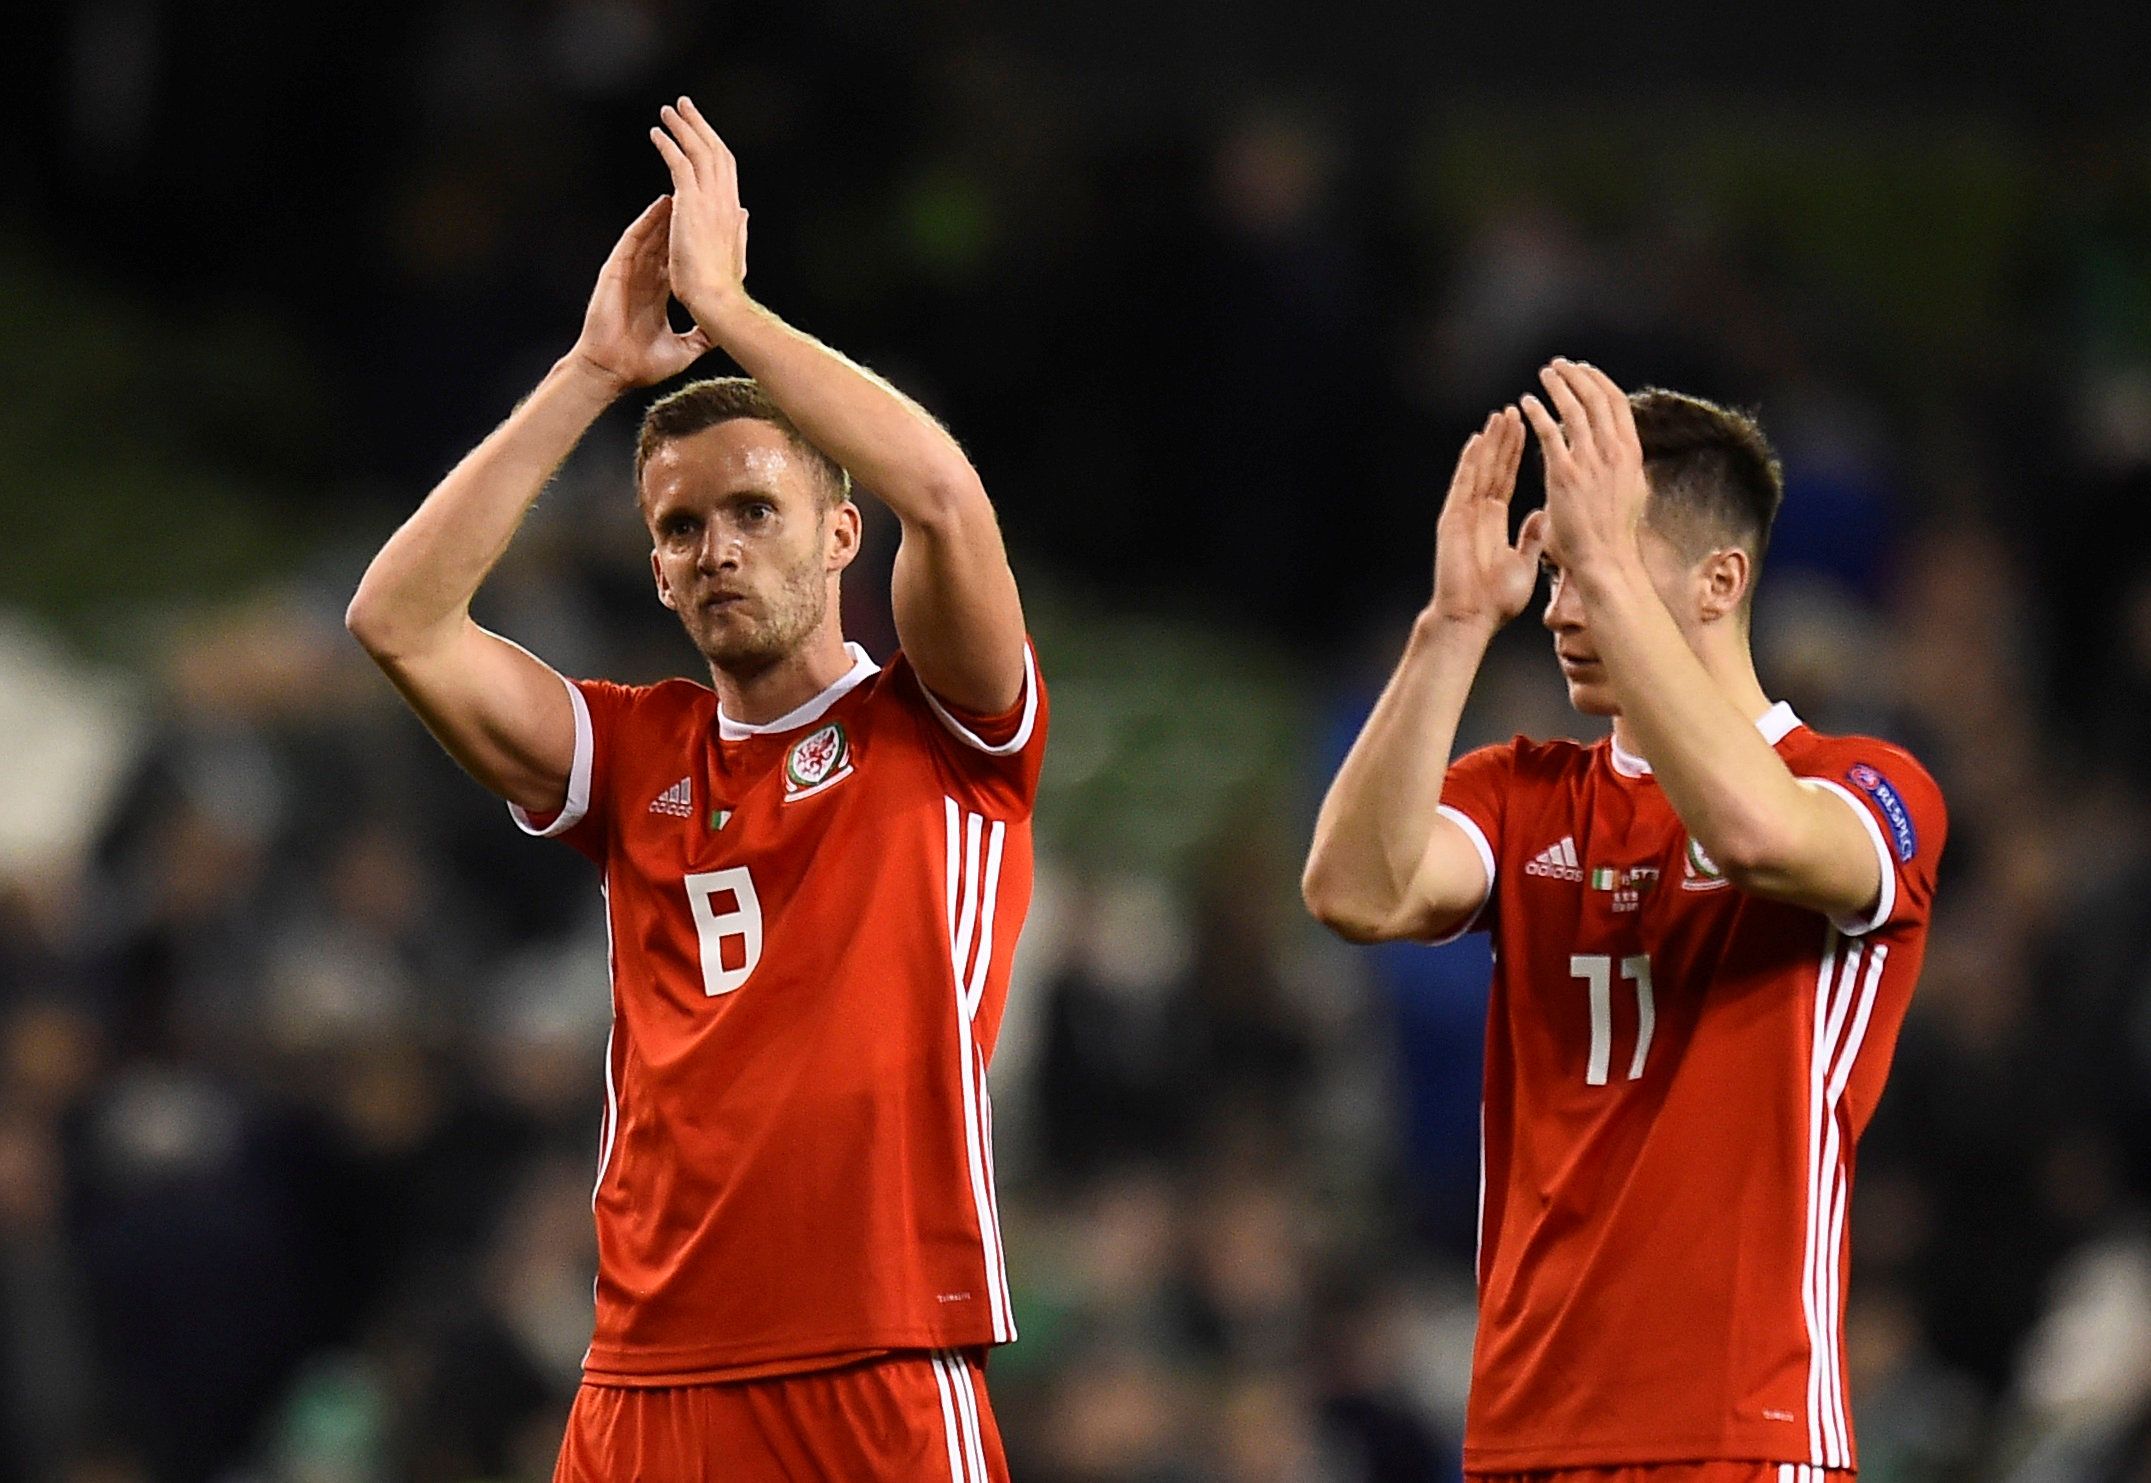 Soccer Football - UEFA Nations League - League B - Group 4 - Republic of Ireland v Wales - Aviva Stadium, Dublin, Republic of Ireland - October 16, 2018  Wales' Andy King and Tom Lawrence applaud their fans after the match   REUTERS/Clodagh Kilcoyne